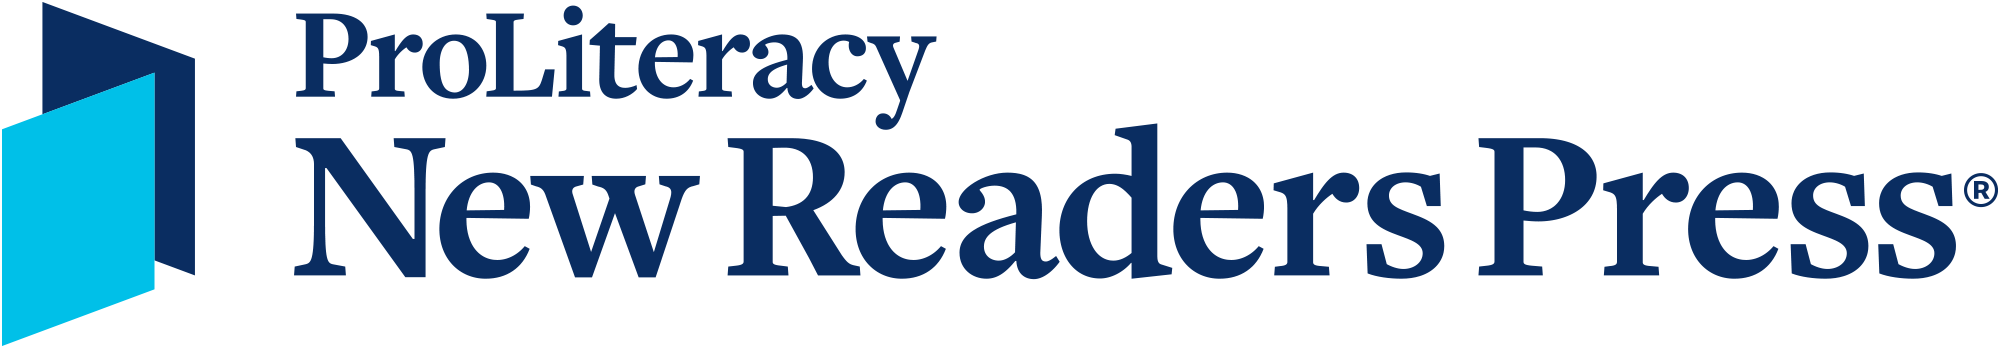 Logo for New Readers Press